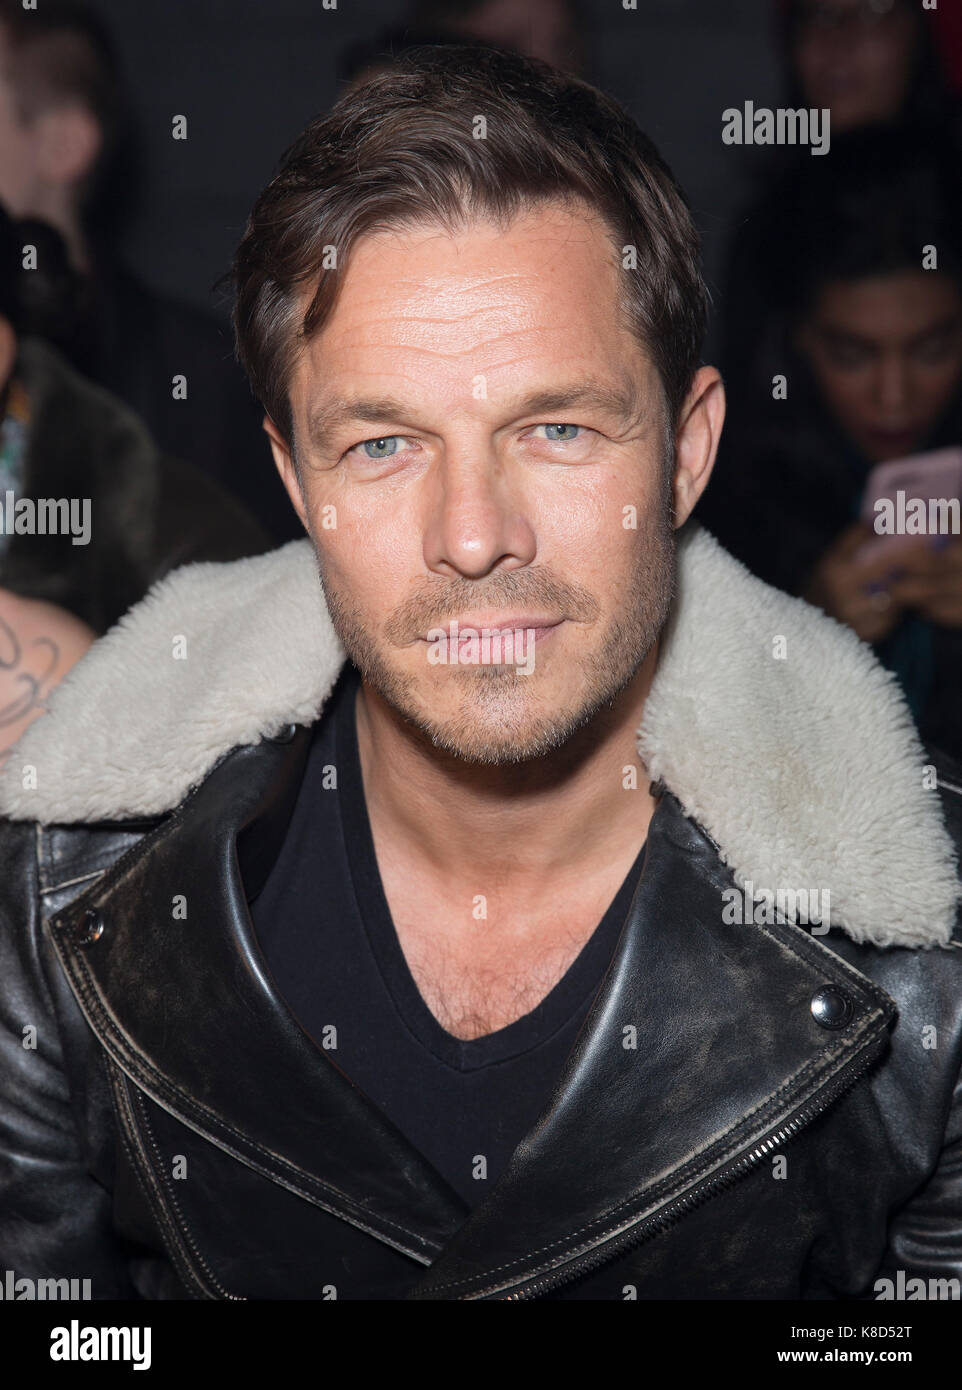 Paul Sculfor on the front row during the Julien Macdonald London Fashion Week SS18 show held at No 1 Invicta Plaza, London Stock Photo